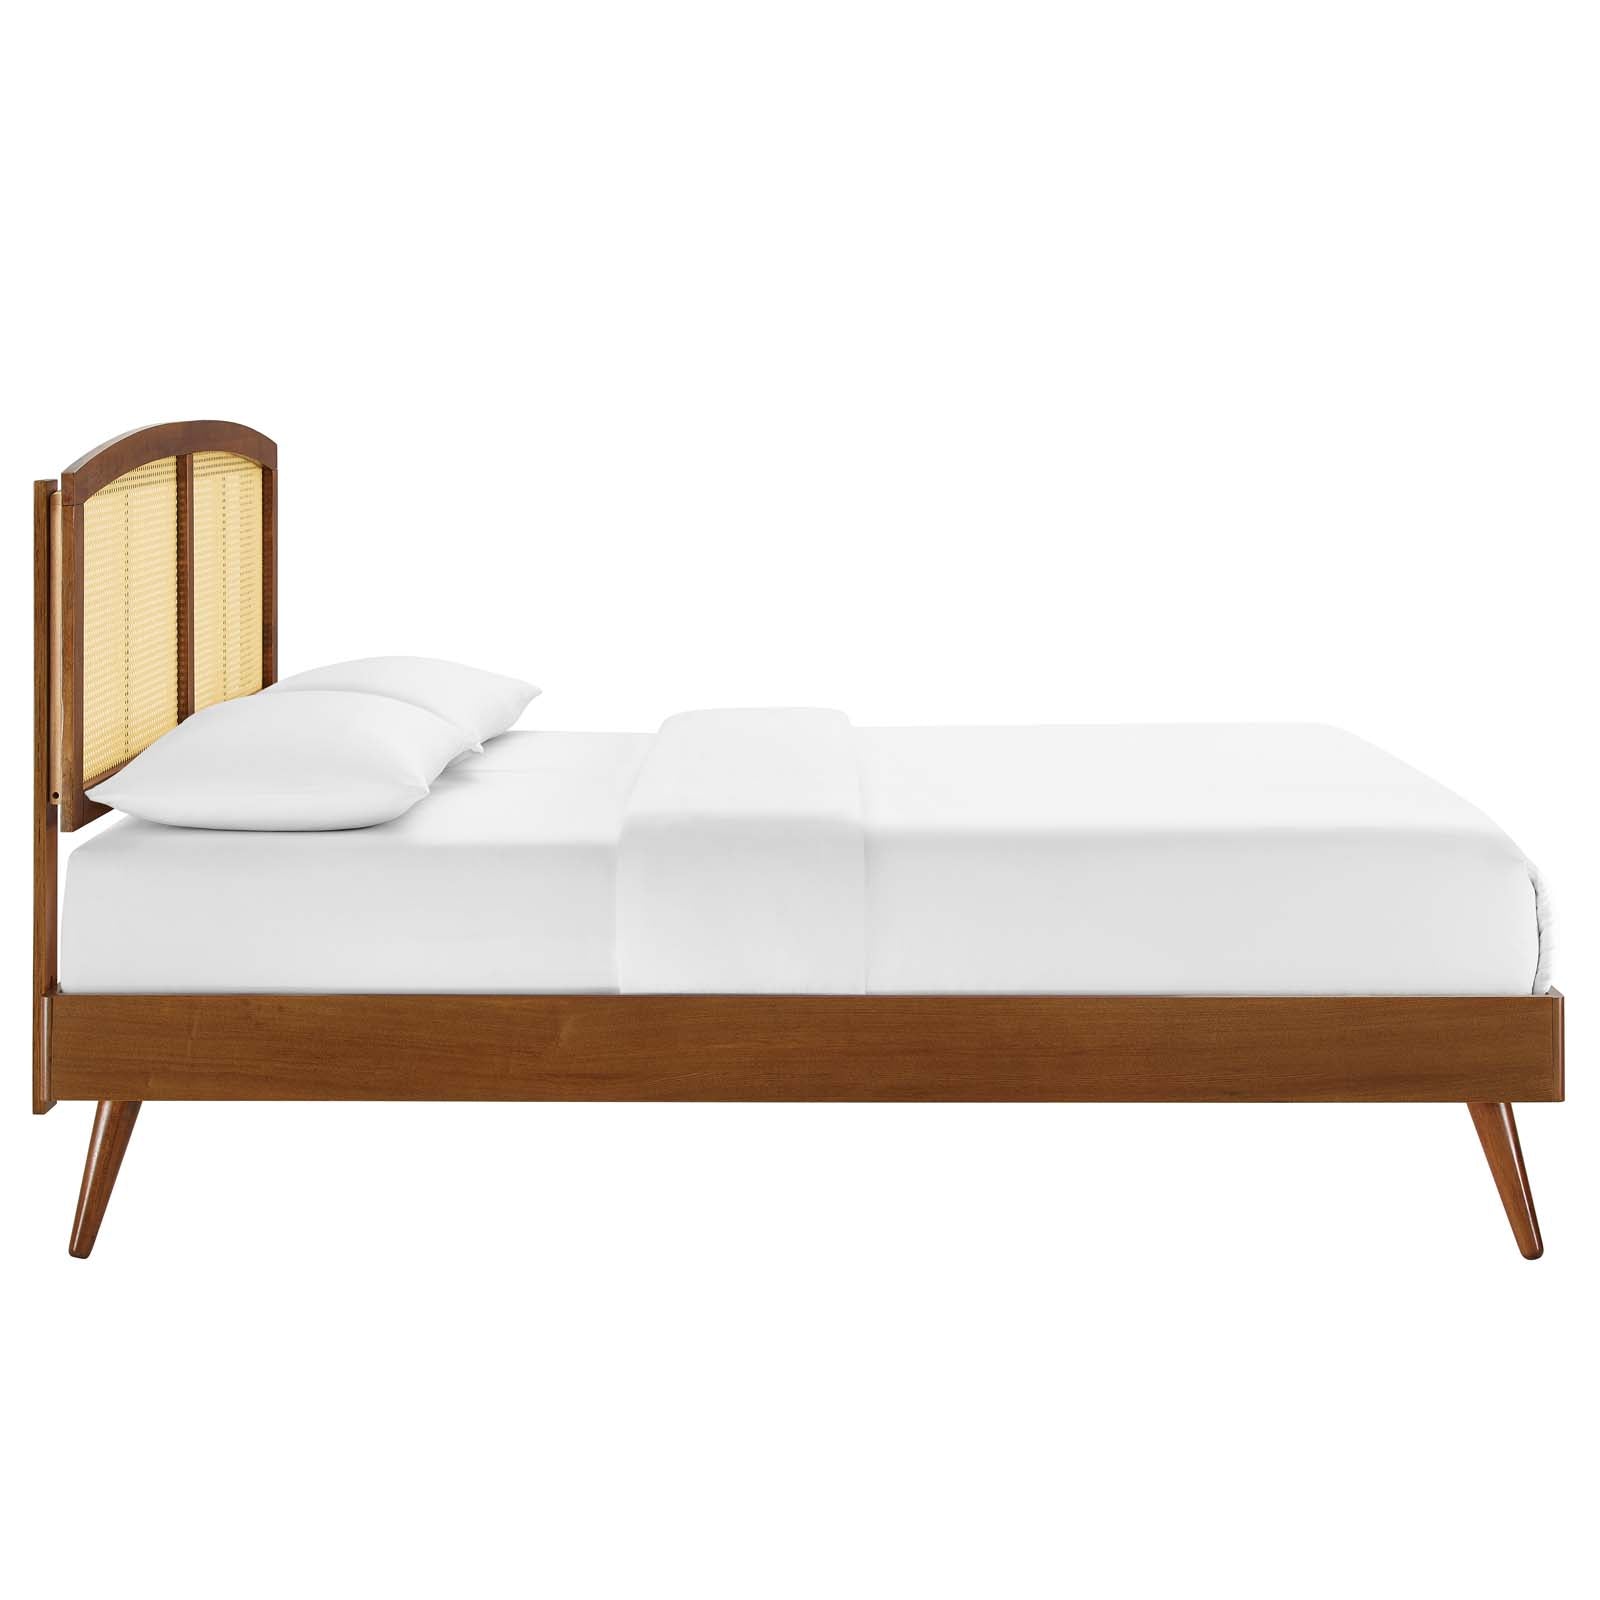 Sierra Cane and Wood Queen Platform Bed With Splayed Legs - East Shore Modern Home Furnishings